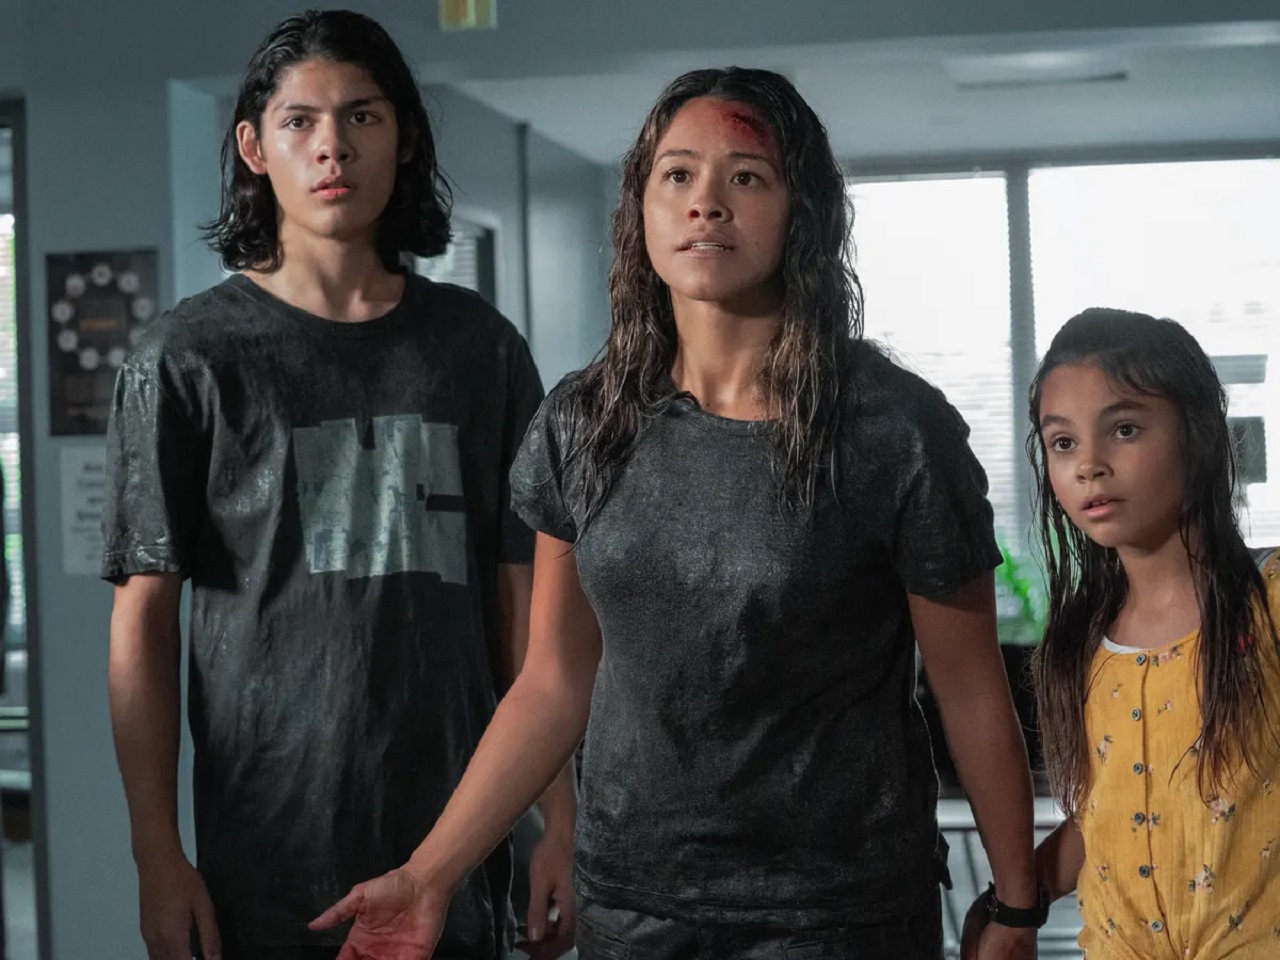 Mother Gina Rodriguez with son Lucius Hoyos and daughter Ariana Greenblatt in Awake (2021)